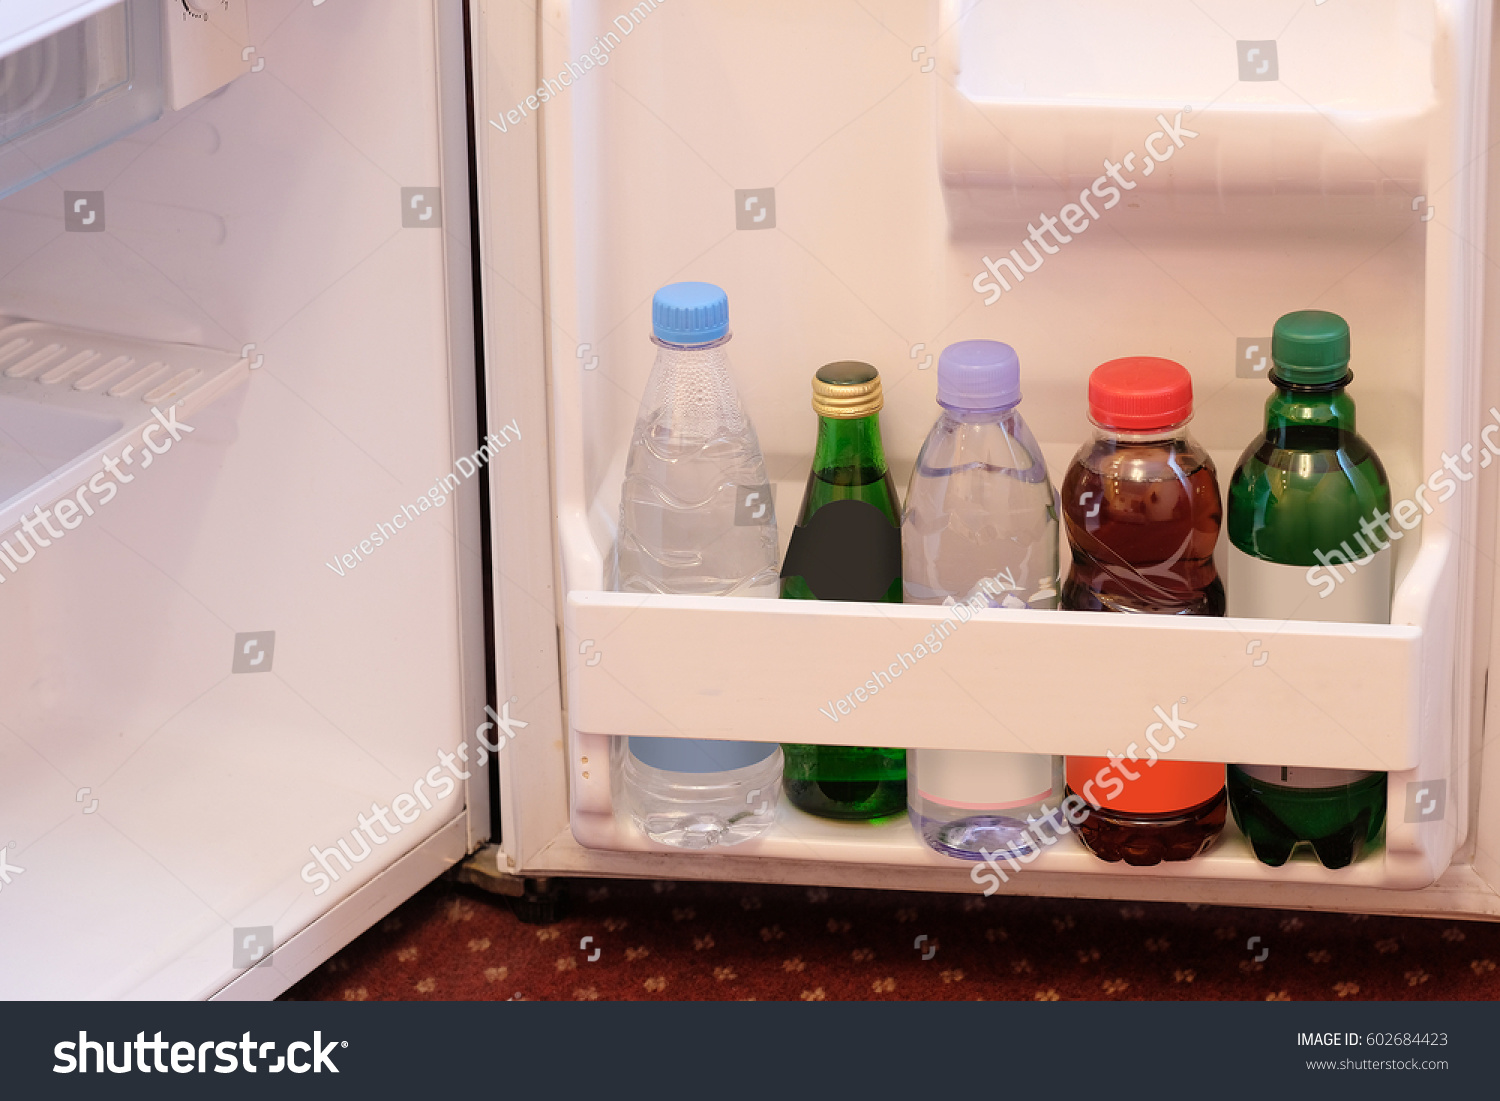 The image of a refrigerator #602684423